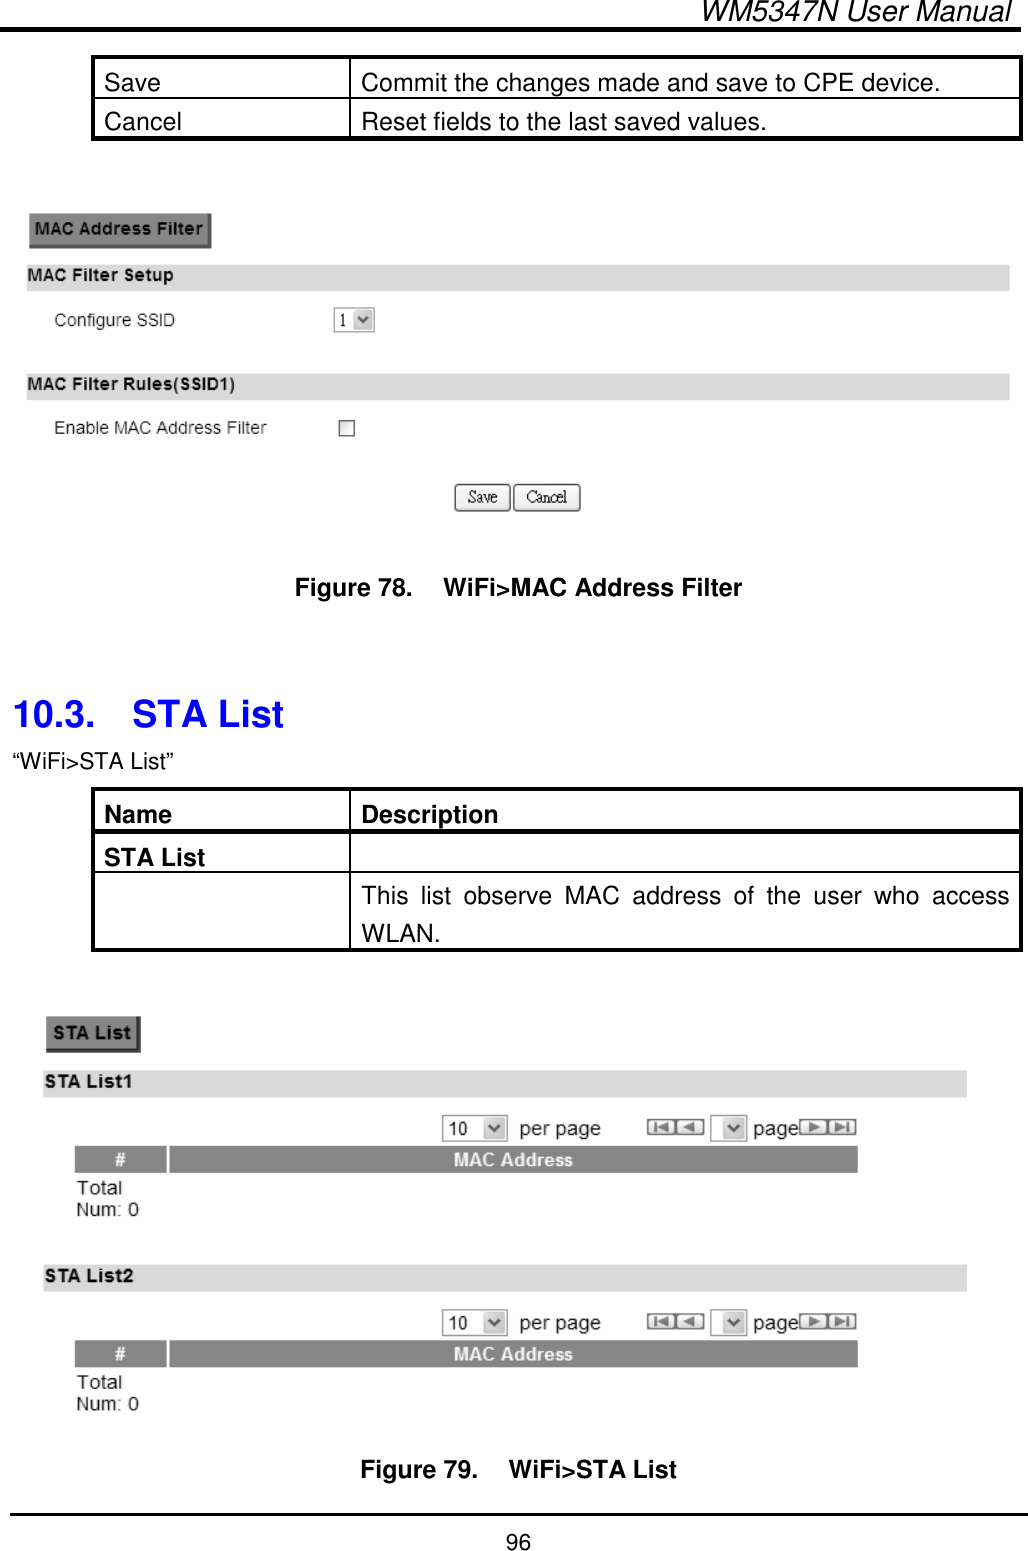  WM5347N User Manual  96 Save  Commit the changes made and save to CPE device. Cancel  Reset fields to the last saved values.   Figure 78.   WiFi&gt;MAC Address Filter   10.3.  STA List “WiFi&gt;STA List” Name  Description STA List     This  list  observe  MAC  address  of  the  user  who  access WLAN.   Figure 79.   WiFi&gt;STA List 